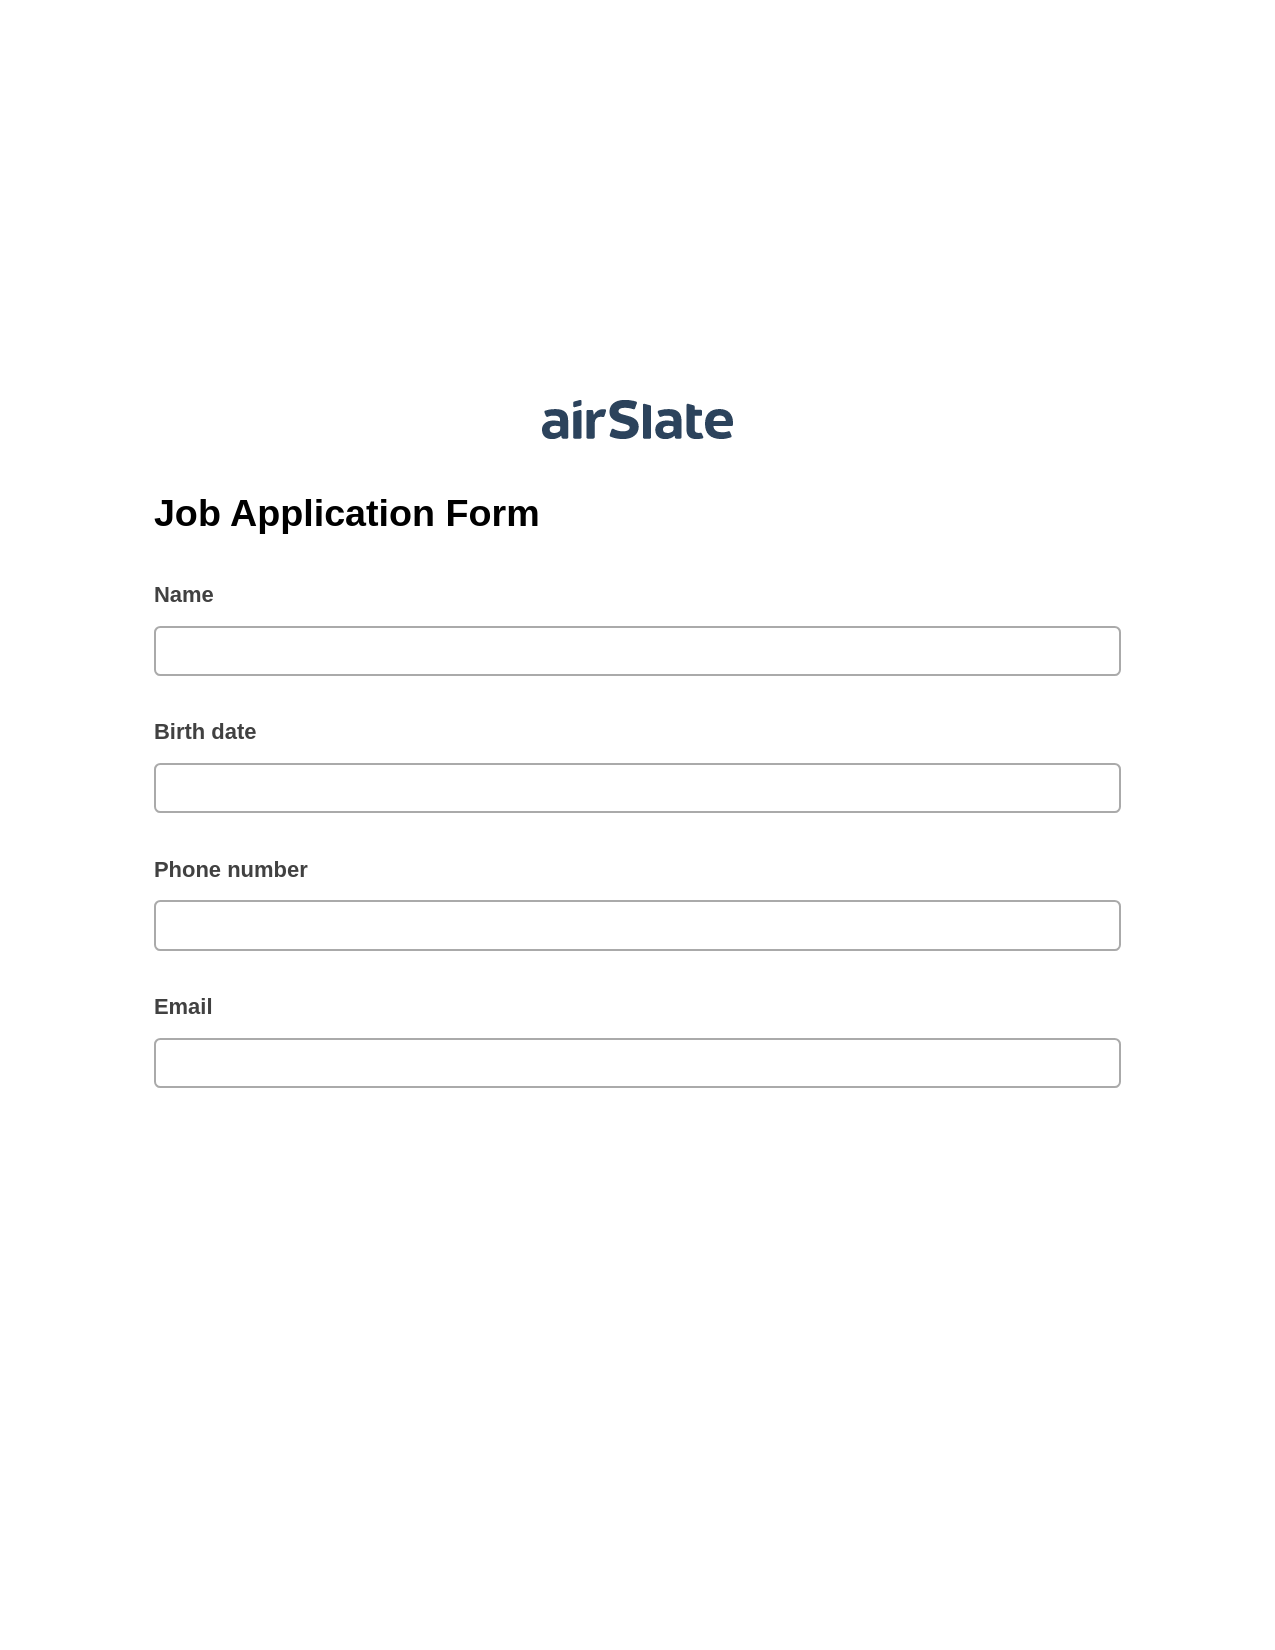 Multirole Job Application Form Pre-fill from NetSuite Records Bot, Create MS Dynamics 365 Records Bot, Post-finish Document Bot